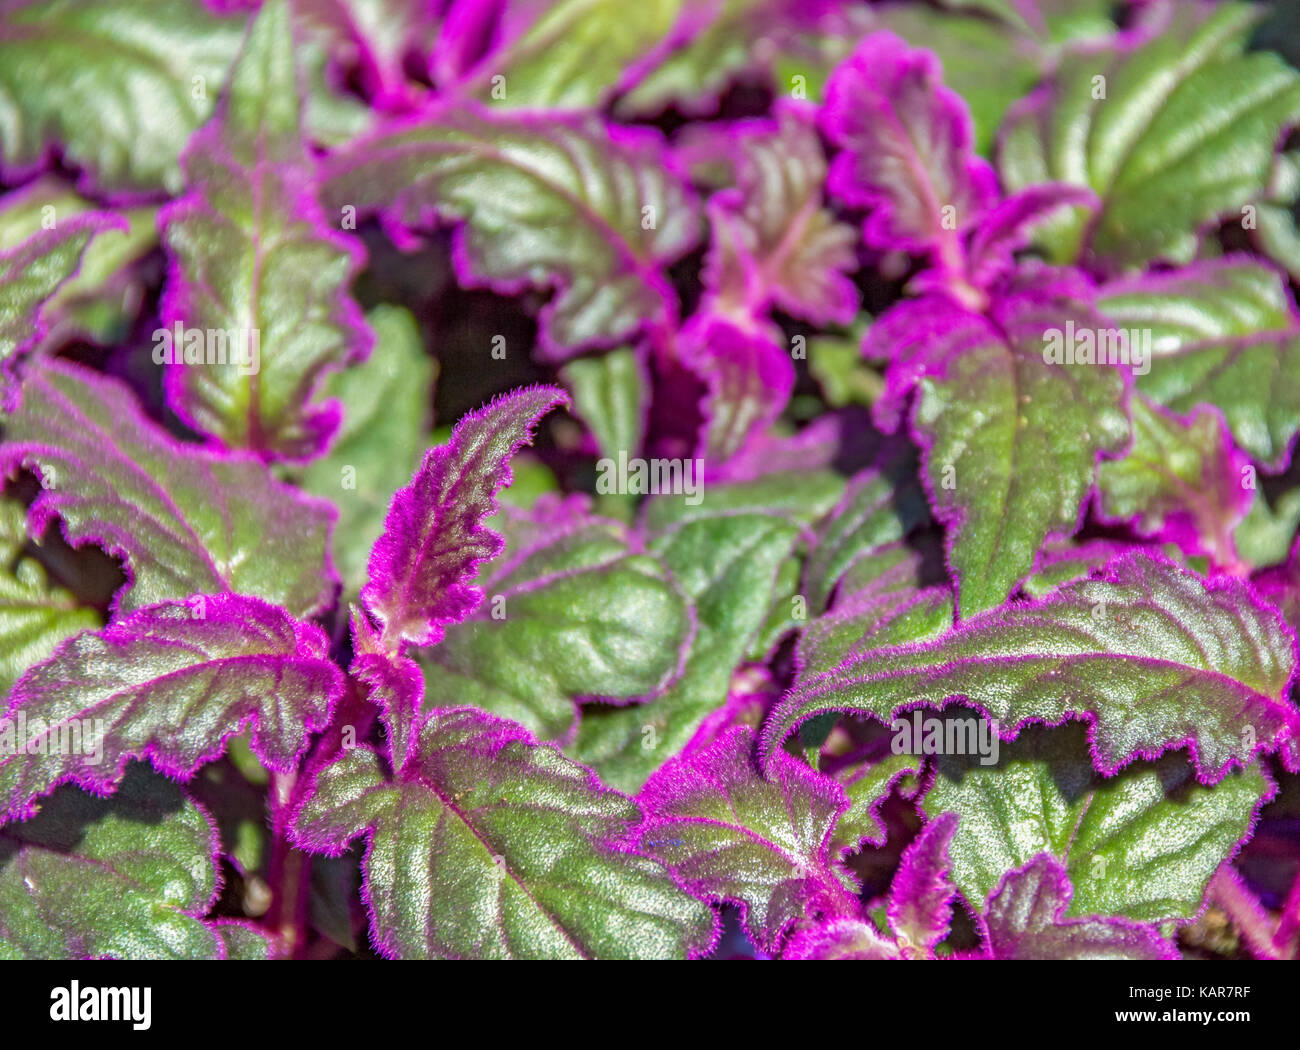 detail shot of some green Gynura leaves with violet fluff Stock Photo